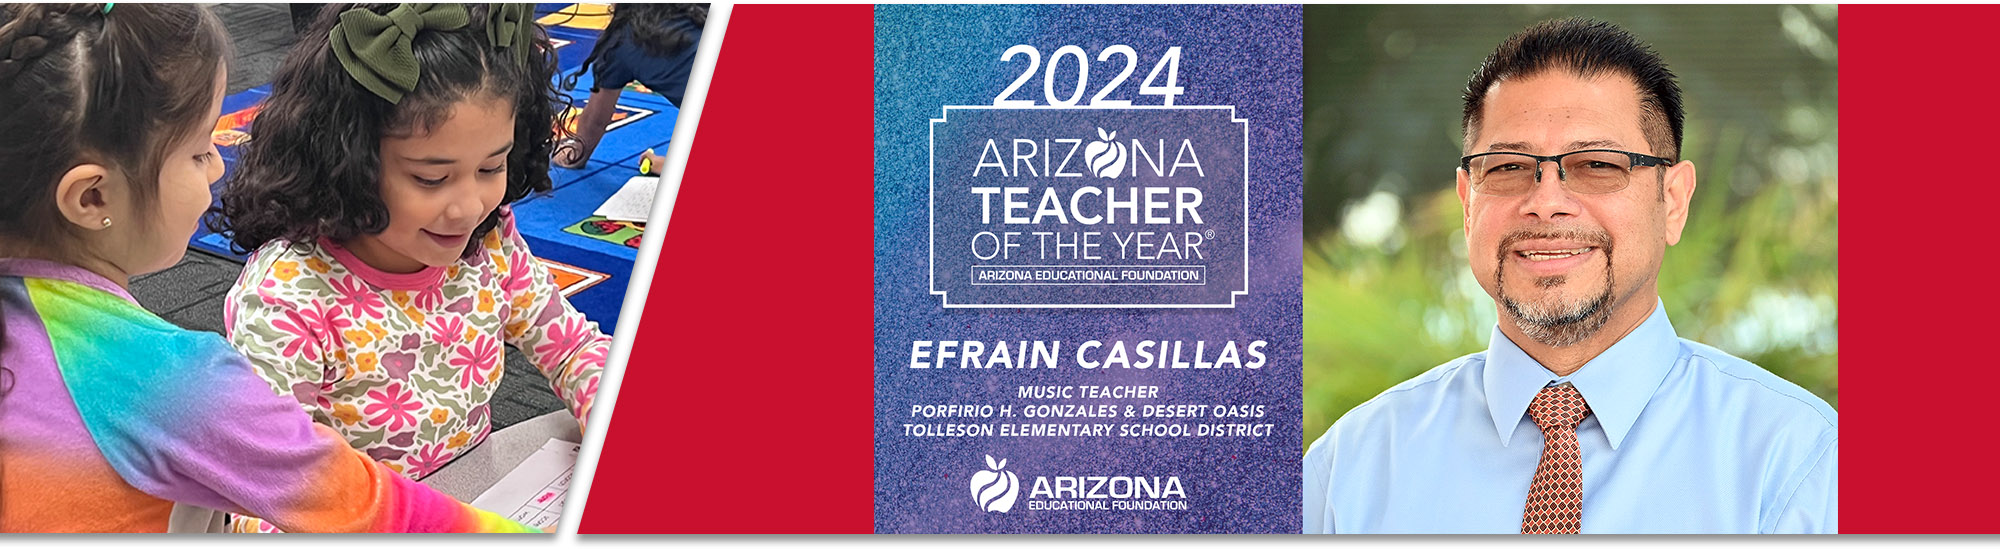 A group of students under an umbrella in the rain and our teacher Mr. Efrain Casillas being named 2024 Arizona Teacher of the Year!